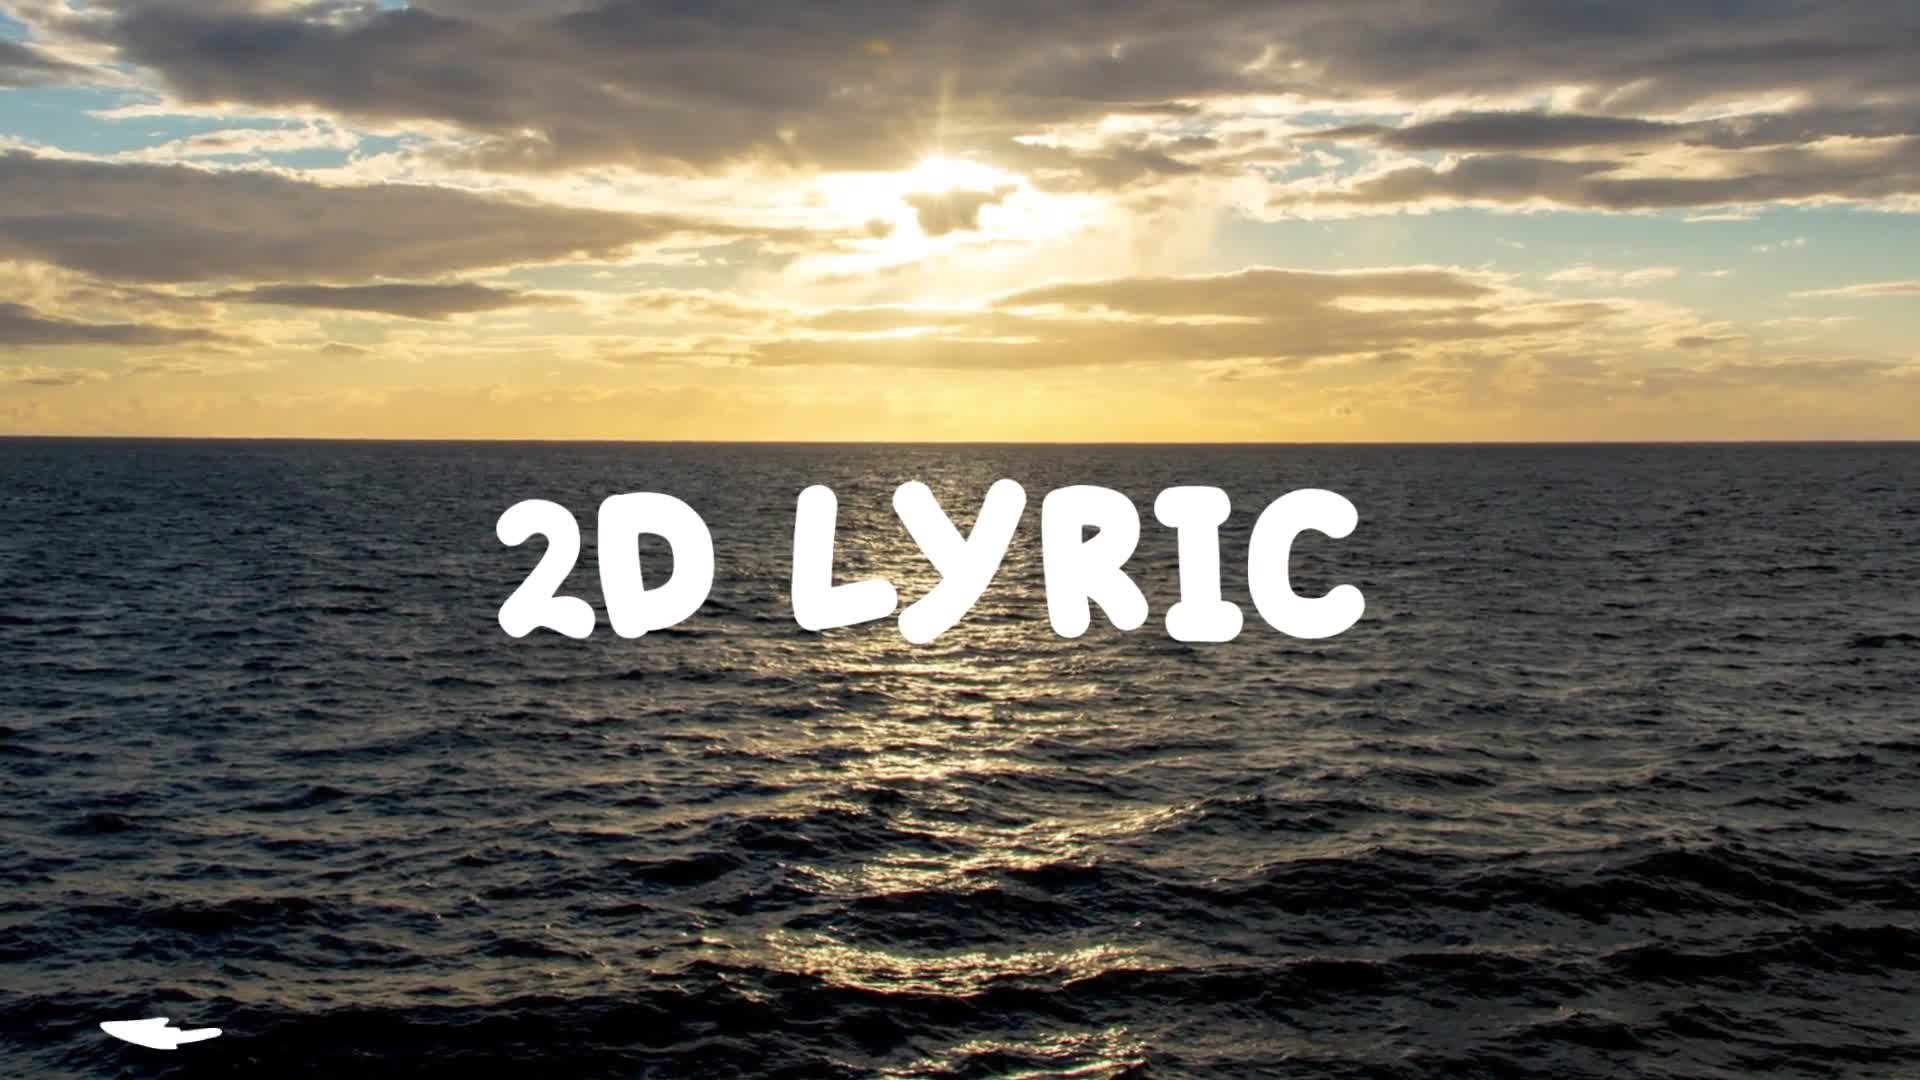 lyric titles after effects template download